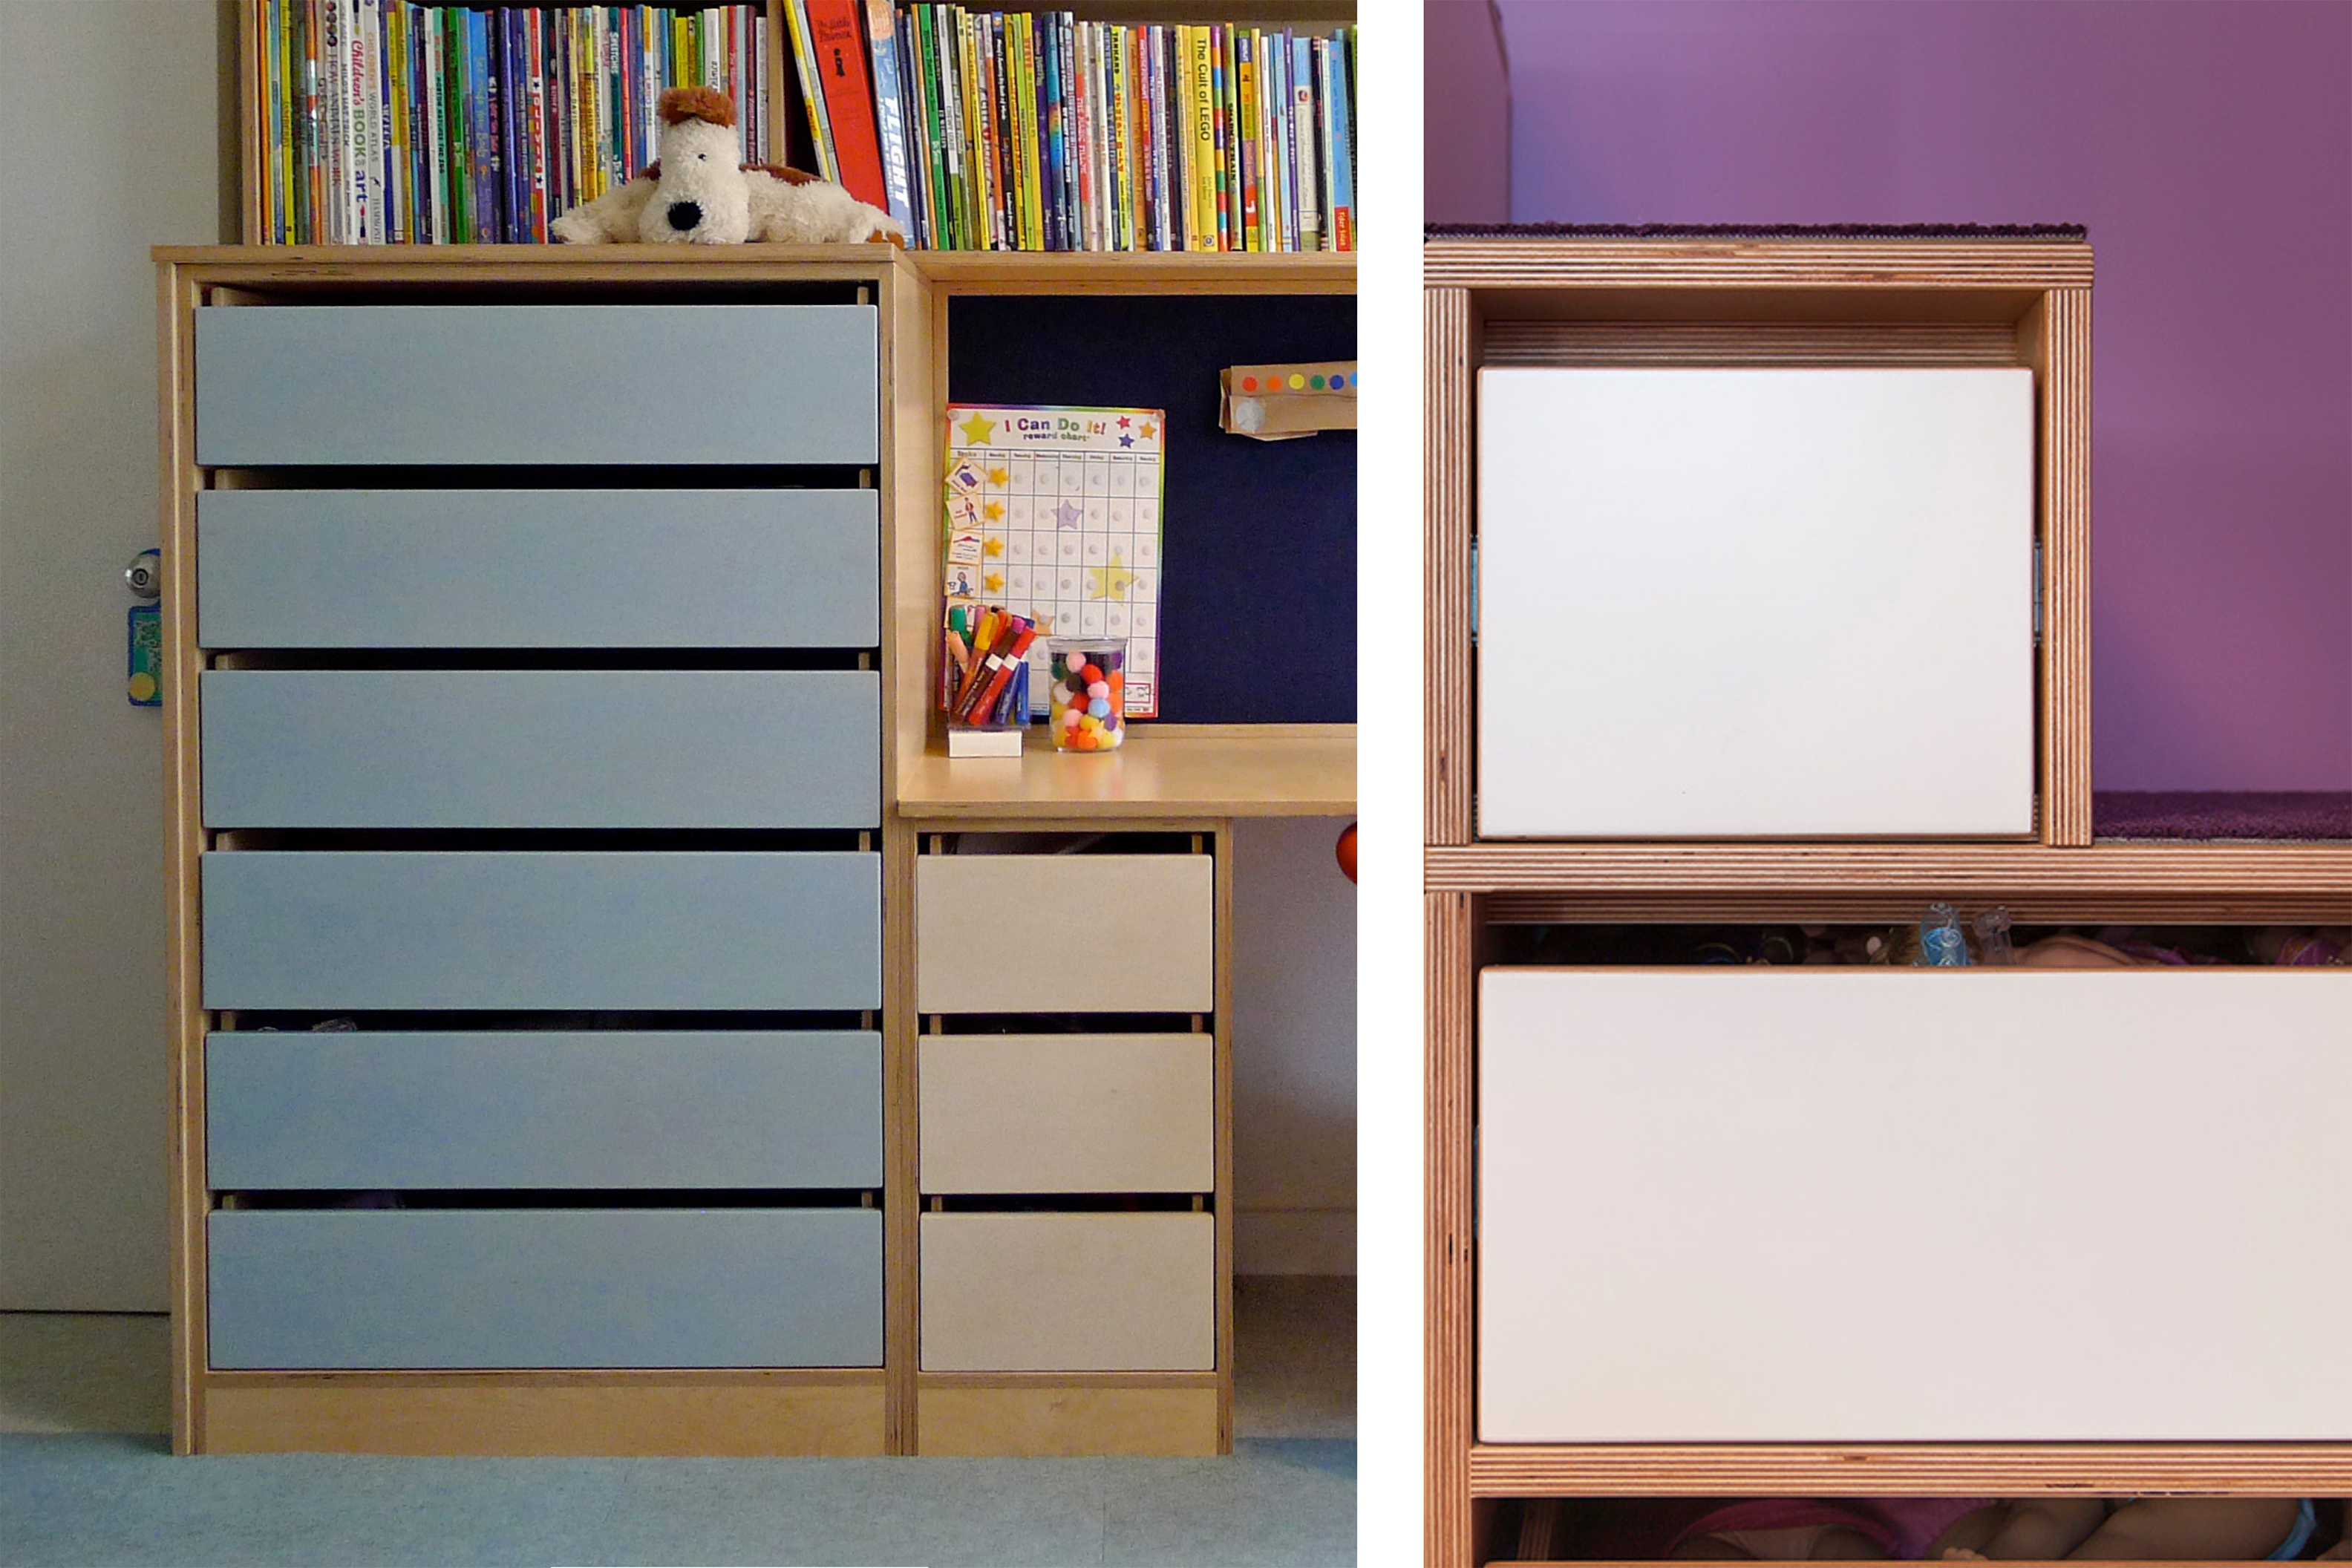 Split image of children's study area with gray drawers and a close-up of a modern drawer in a purple room.